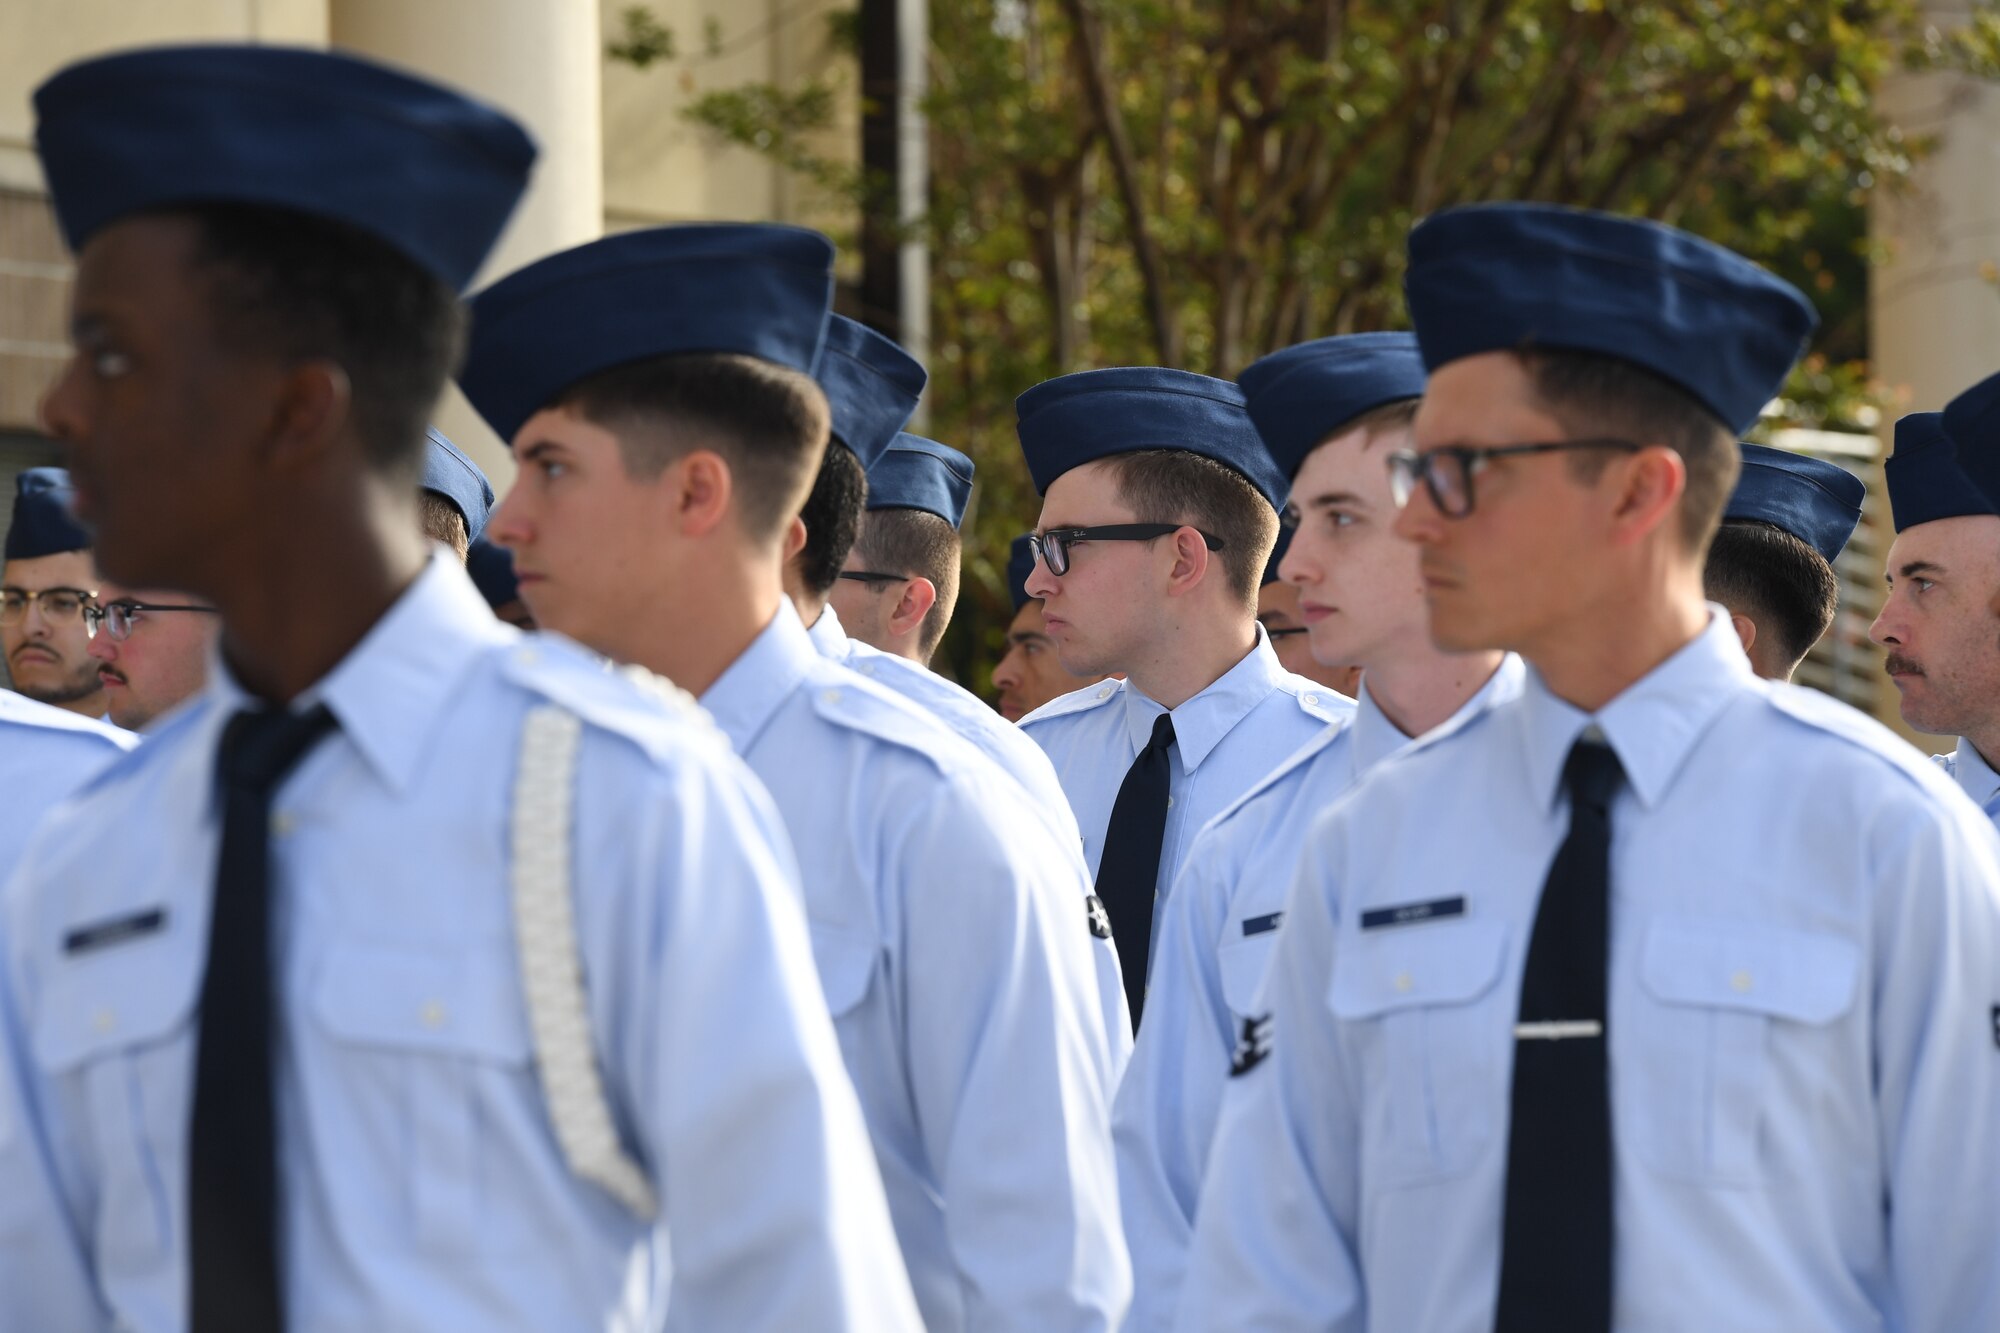 Airmen from the 81st Training Group march in formation  during the 81st Training Wing assumption of command ceremony on the Levitow Training Support Facility drill pad at Keesler Air Force Base, Mississippi, March 23, 2023.